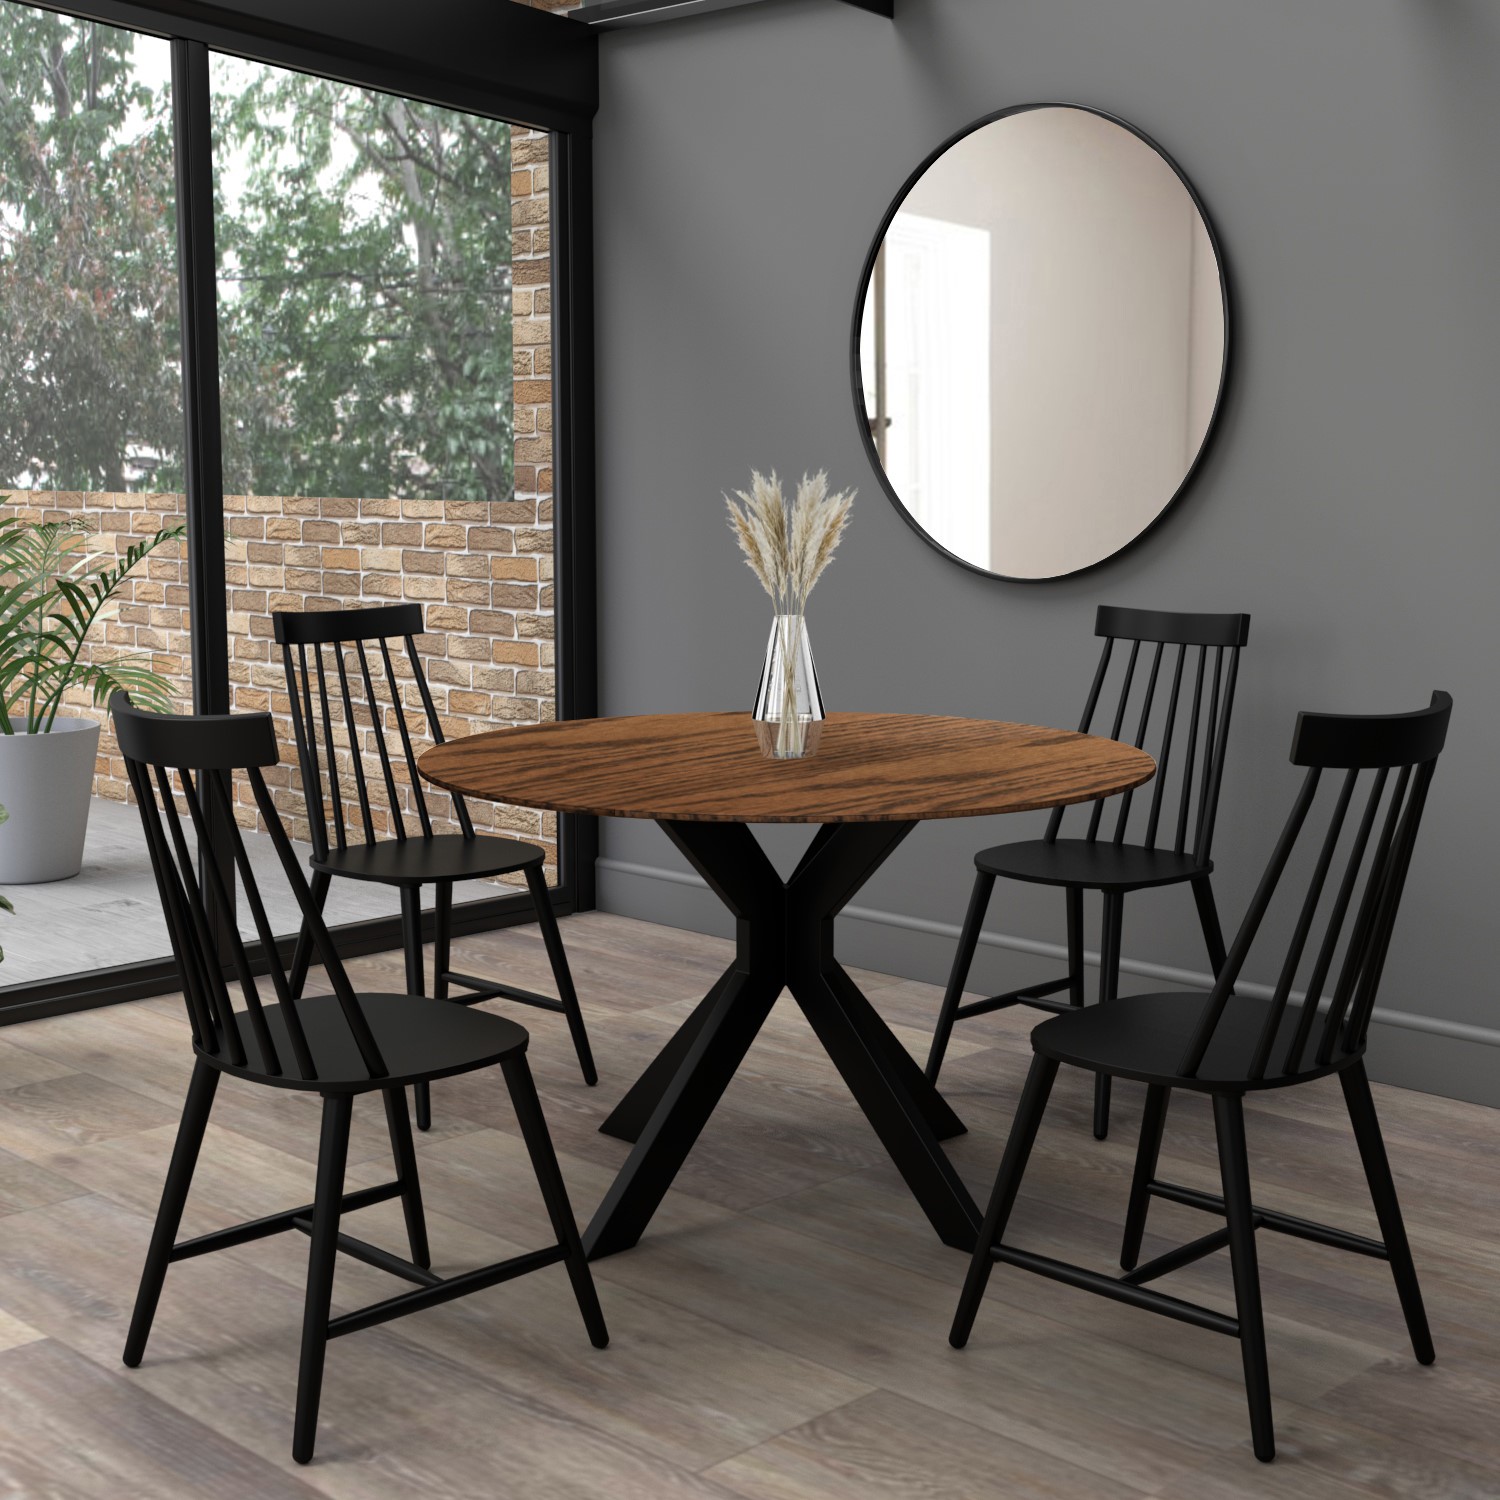 Cami Dining Chair - Black